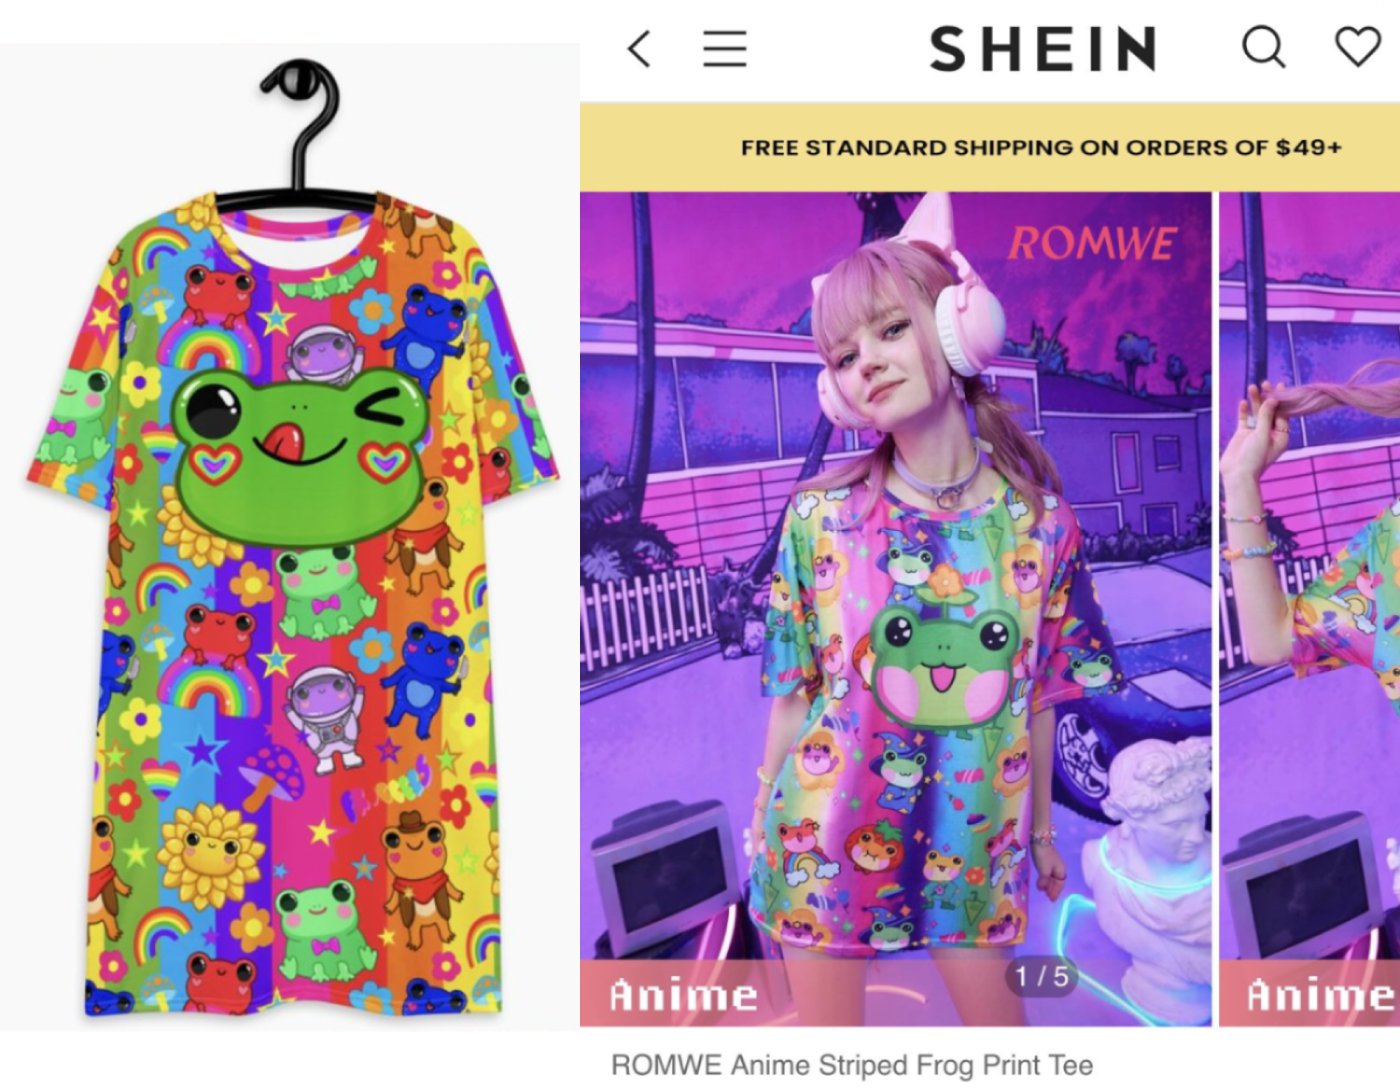 Shein Japanese Anime Cartoon Top, X-Large Top,Black & White, Excellent  Condition | Cartoon tops, Black tops, Tops